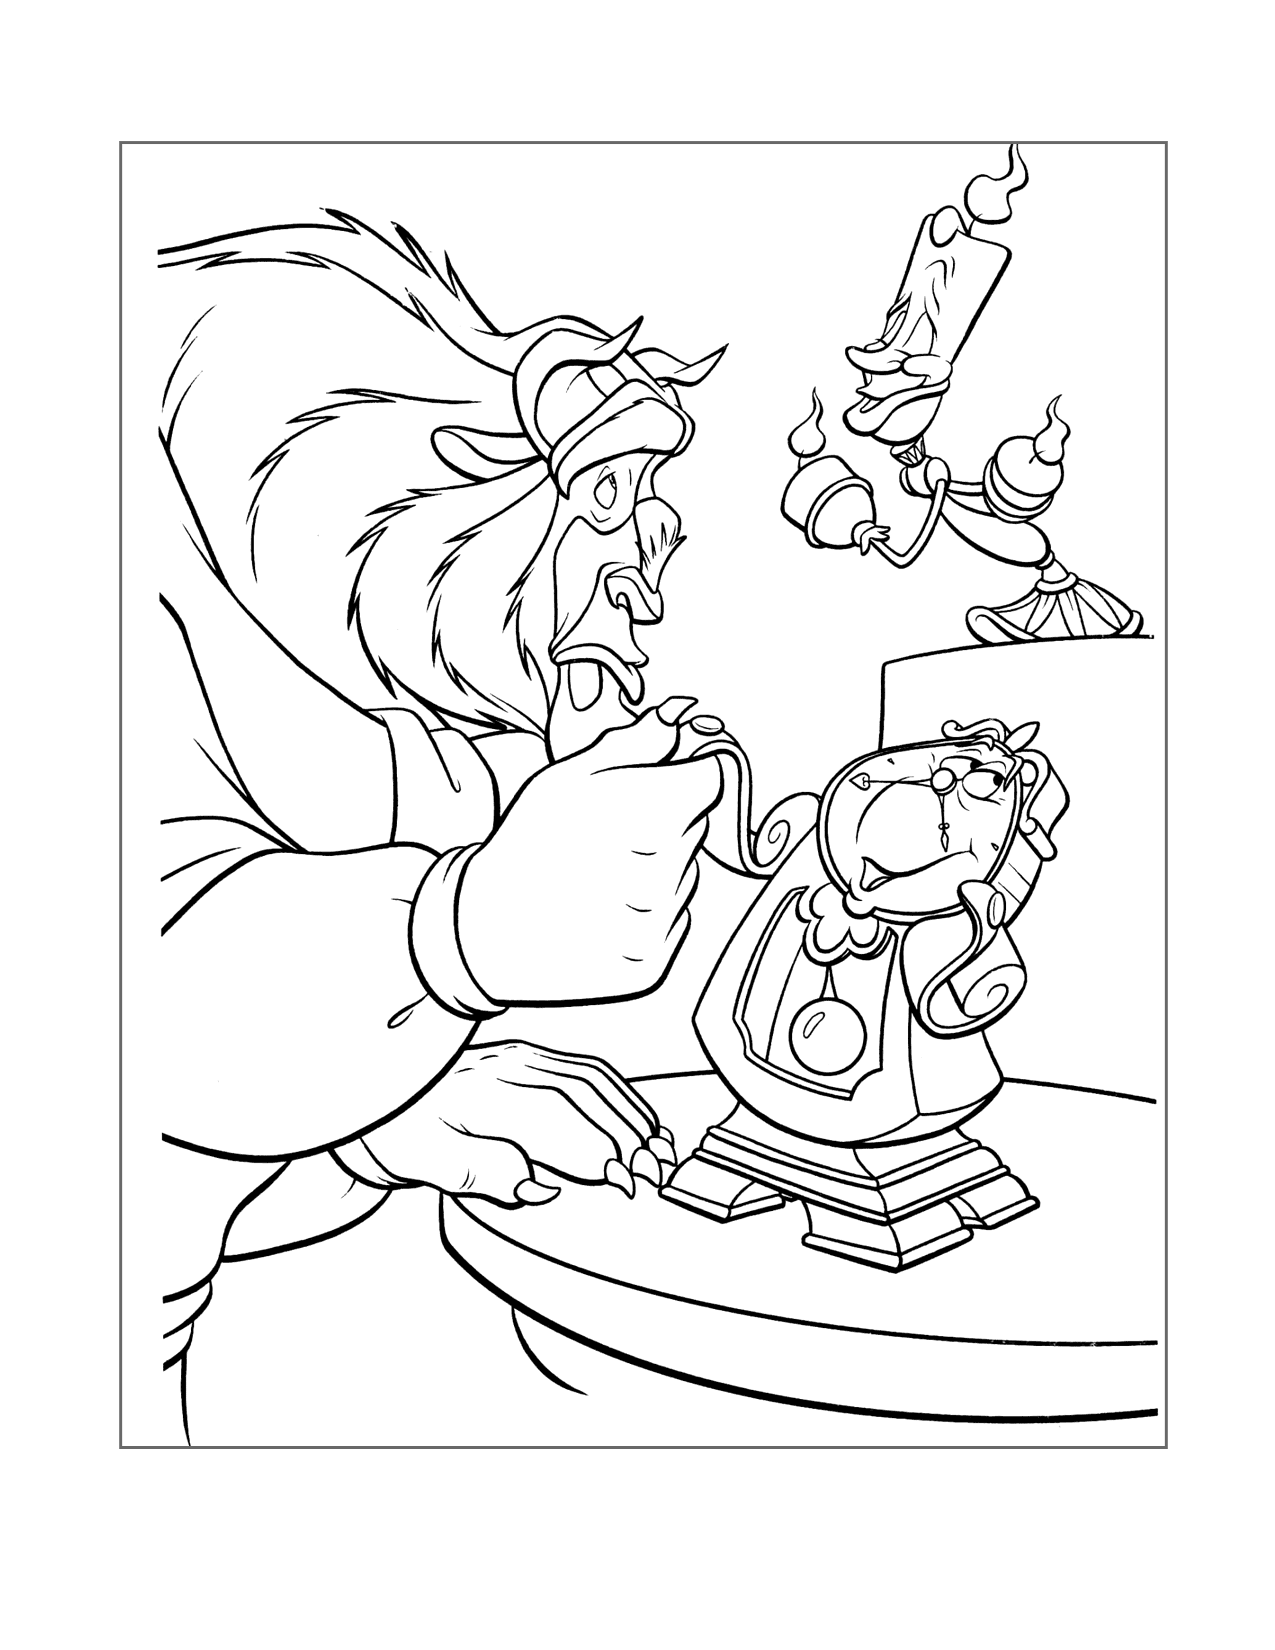 Beast Cogsworth And Lumiere Coloring Page